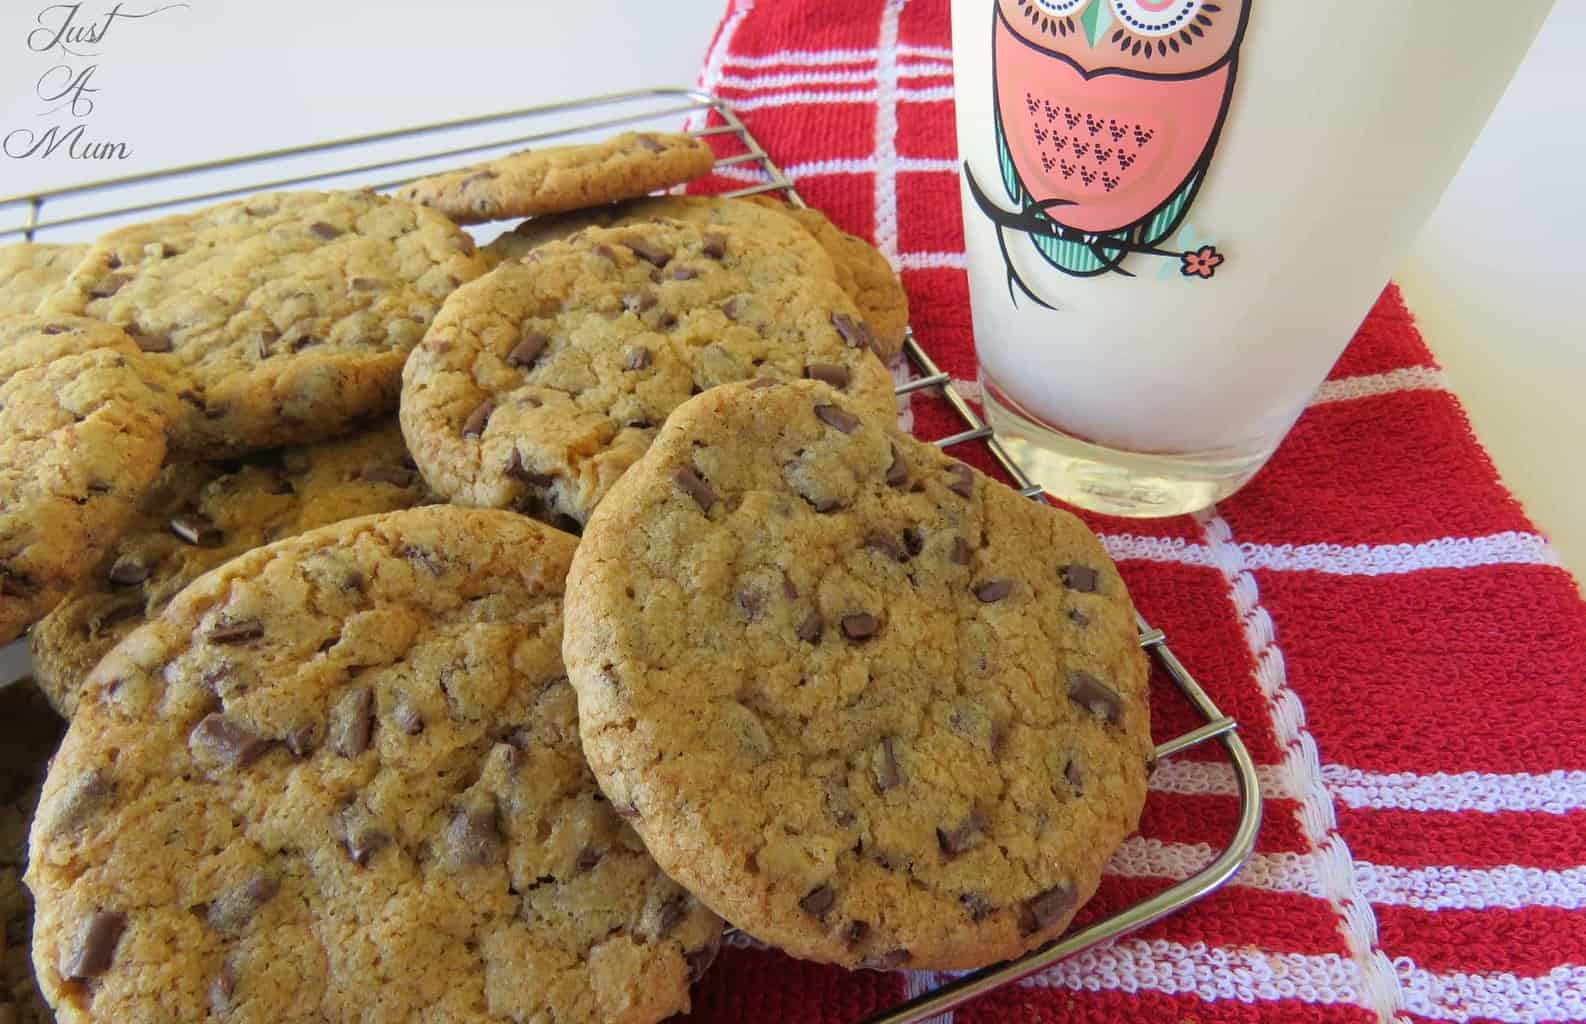 Just A Mum's Best Ever Chewy Chocolate Chip Cookie